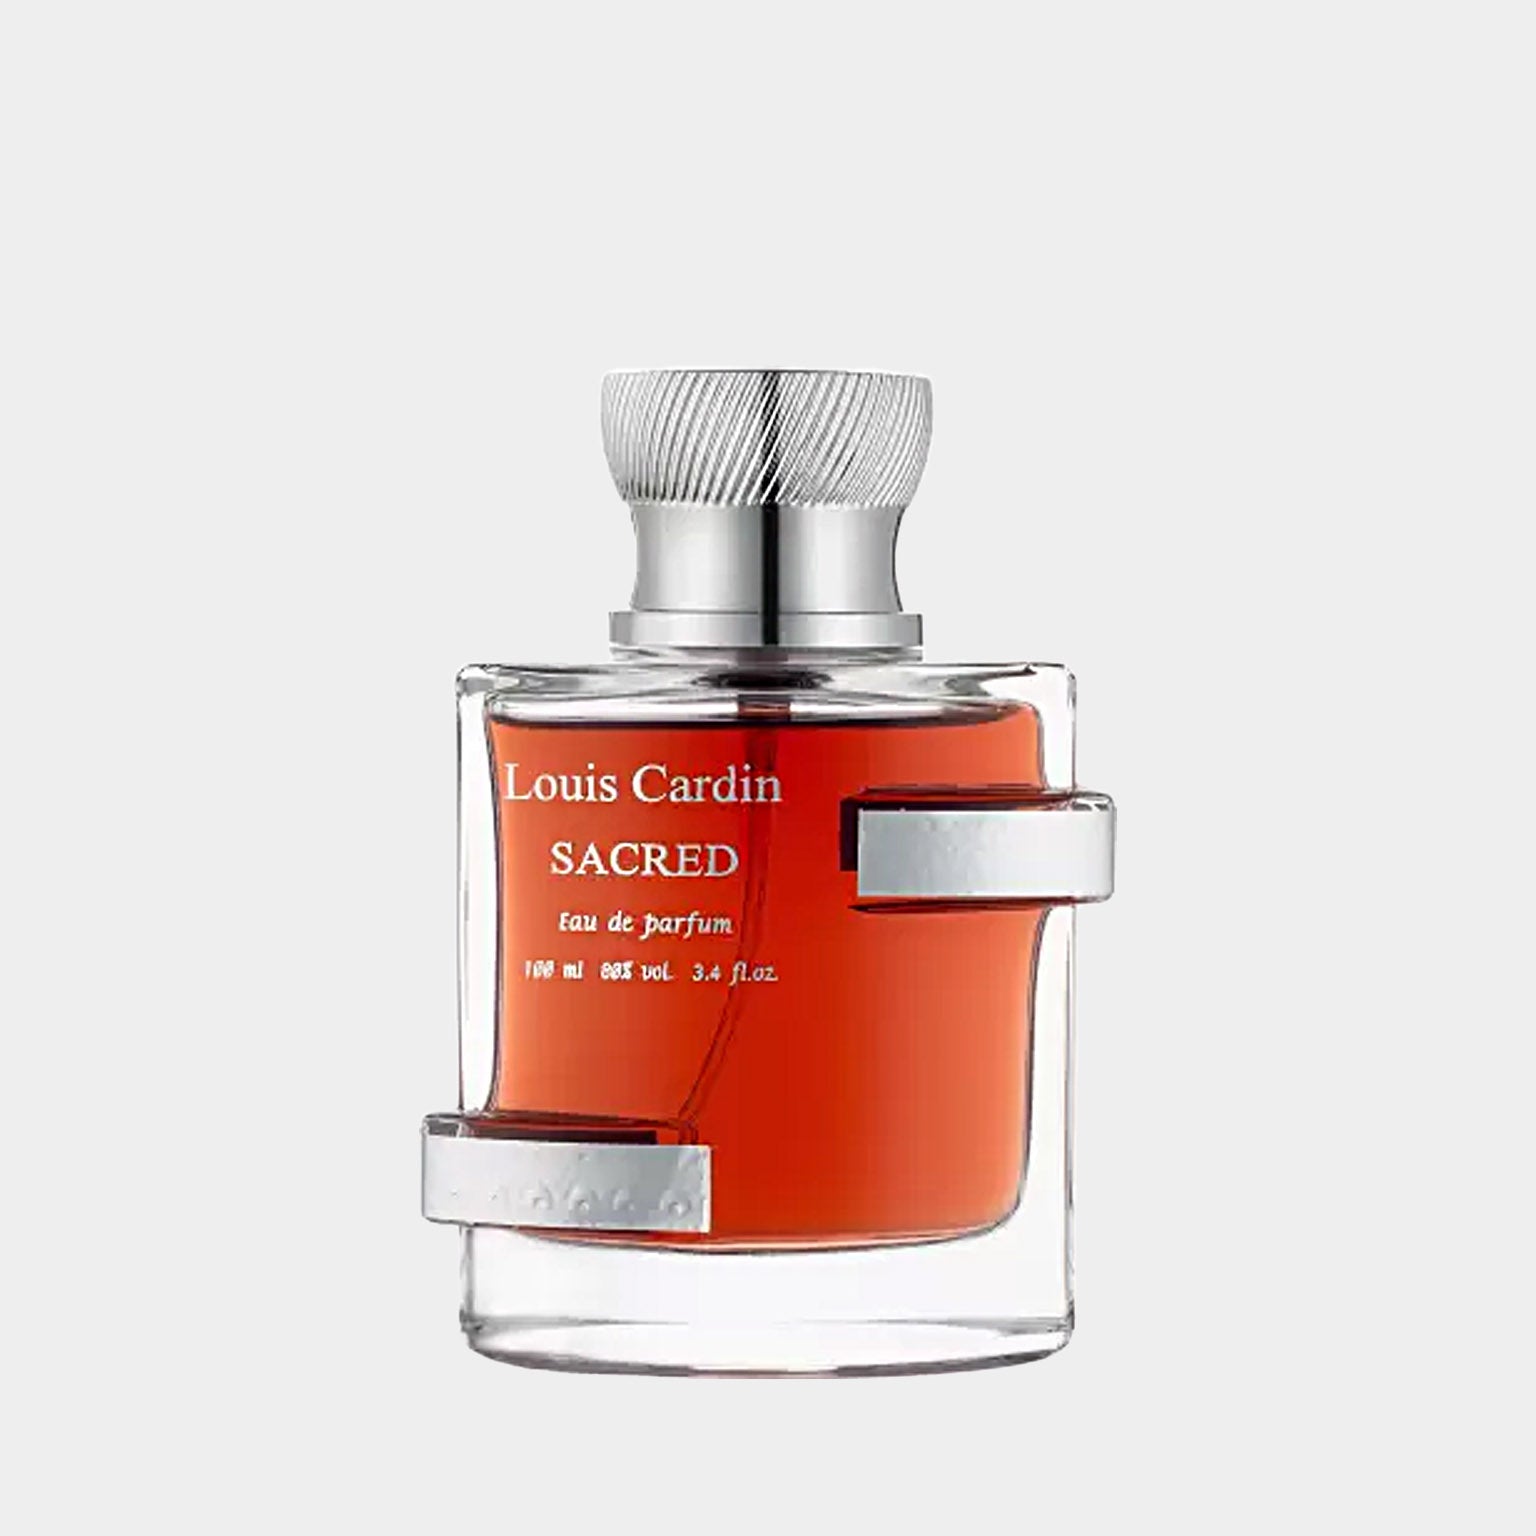 Louis Cardin Sacred Fragrance Review (2011) 